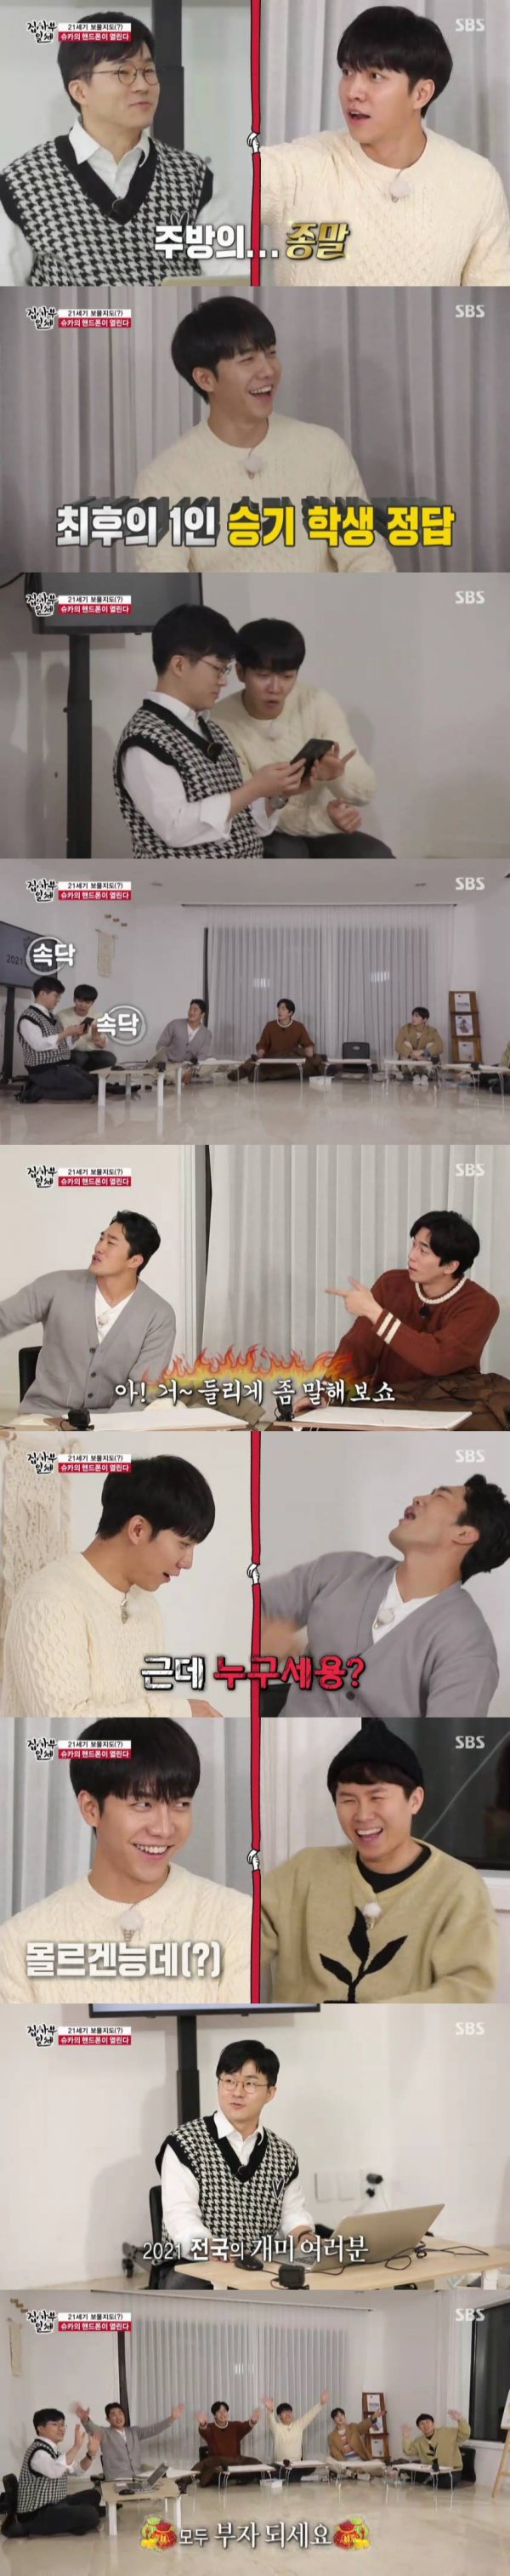 SBS All The Butlers The God of Investment Shuka appeared as master and revealed the smart Investment law to focus attention on Jurin.According to Nielsen Korea, a TV viewer rating research institute, the furniture TV viewer ratings of SBS All The Butlers, which was broadcast on the 28th, were 7%, drawing the rise of TV viewer ratings for three consecutive weeks.The topic and competitiveness index, 2049 Target TV viewer ratings, also rose to 3.9%, and the highest TV viewer ratings per minute was 7.9%.On this day, economic creator Shuka appeared and lectured on Investment tweezers.The production team said, As it is one of the keywords that are paying attention in 2021, Financial Investment, the visiting master who will inform you of the smart investment law comes.The master of the day was the economic creator Shuka, called the Messiah of the Jurin.Shuka said, I am a professional trader and fund manager, and now I am working as an economic creator.Cha Eun-woo said, Can I ask you directly? He asked, What a sport do you have?Shuka said, It is a very good portfolio, and said, I will show portfolio to todays honor students.First, Shuka said, The first step of all investment is to know how my asset allocation is, he said.The members portfolio was released.Lee Seung-gis portfolio had the highest deposits at 40%, and assets such as pension insurance, stocks and real estate were stably and appropriately allocated.Shuka evaluated Lee Seung-gis portfolio as portfolio to become a typical rich person, and Lee Seung-gi said, My parents are from bankers.There is something you do stably, he said.On this day, Shuka gave a lecture on Investment, saying, We should pay attention to the future vision instead of the current share price of the company, and We need to judge whether social change and corporate direction coincide with when choosing a sport.He also talked about the direction of Investment to be noted in 2021.Shuka mentioned the keywords climate change, digital change, the end of the kitchen, and said, We need to look at these changes more carefully than to invest immediately.If we think about social change before we think about stocks, we can approach them relatively easily, he said. It is important to take the direction of investment in line with social changes.The most important thing is where the direction of the ship I chose is to go, Shuka said. Most of the CEOs words and announcements come from the direction.He explained it easily, taking an example of directionality, and then asked if Shuka had stock in the company mentioned in the article.Of course I do, Shuka said, and most companies think they are at the forefront of change. Most of them are doing investments.In addition, Shuka said tips such as I will look long and do value investment and I will buy in installments without aiming for a full price.After that, Shuka decided to release his portfolio to the last member who was facing the problem: the last problem was to meet three of the themes of the class, 2021 Investment Direction.The members were more enthusiastic than ever, and Lee Seung-gi was the last one to answer the correct answer.Shuka said, This should not be on TV, and Lee Seung-gi said, I thought there would be an unusual a sport that I did not know at all, but eight out of ten were coming out while we talked.The members said, Please tell me, What are the other two? And Lee Seung-gi joked, Who are you? And laughed.The scene in which Lee Seung-gi, the last one, answered the members shouts witfully was Prayer with 7.9% of TV viewer ratings per minute.Meanwhile, at the end of the broadcast, it was noticed that a large project would be held for the first time in All The Butlers.This is a failure festival where true failures gather together, and after the appearance of Tak Jae-hoon and Lee Sang-min, the singer Rain, who was connected to the phone, said, You can come home, raising expectations for next weeks broadcast.